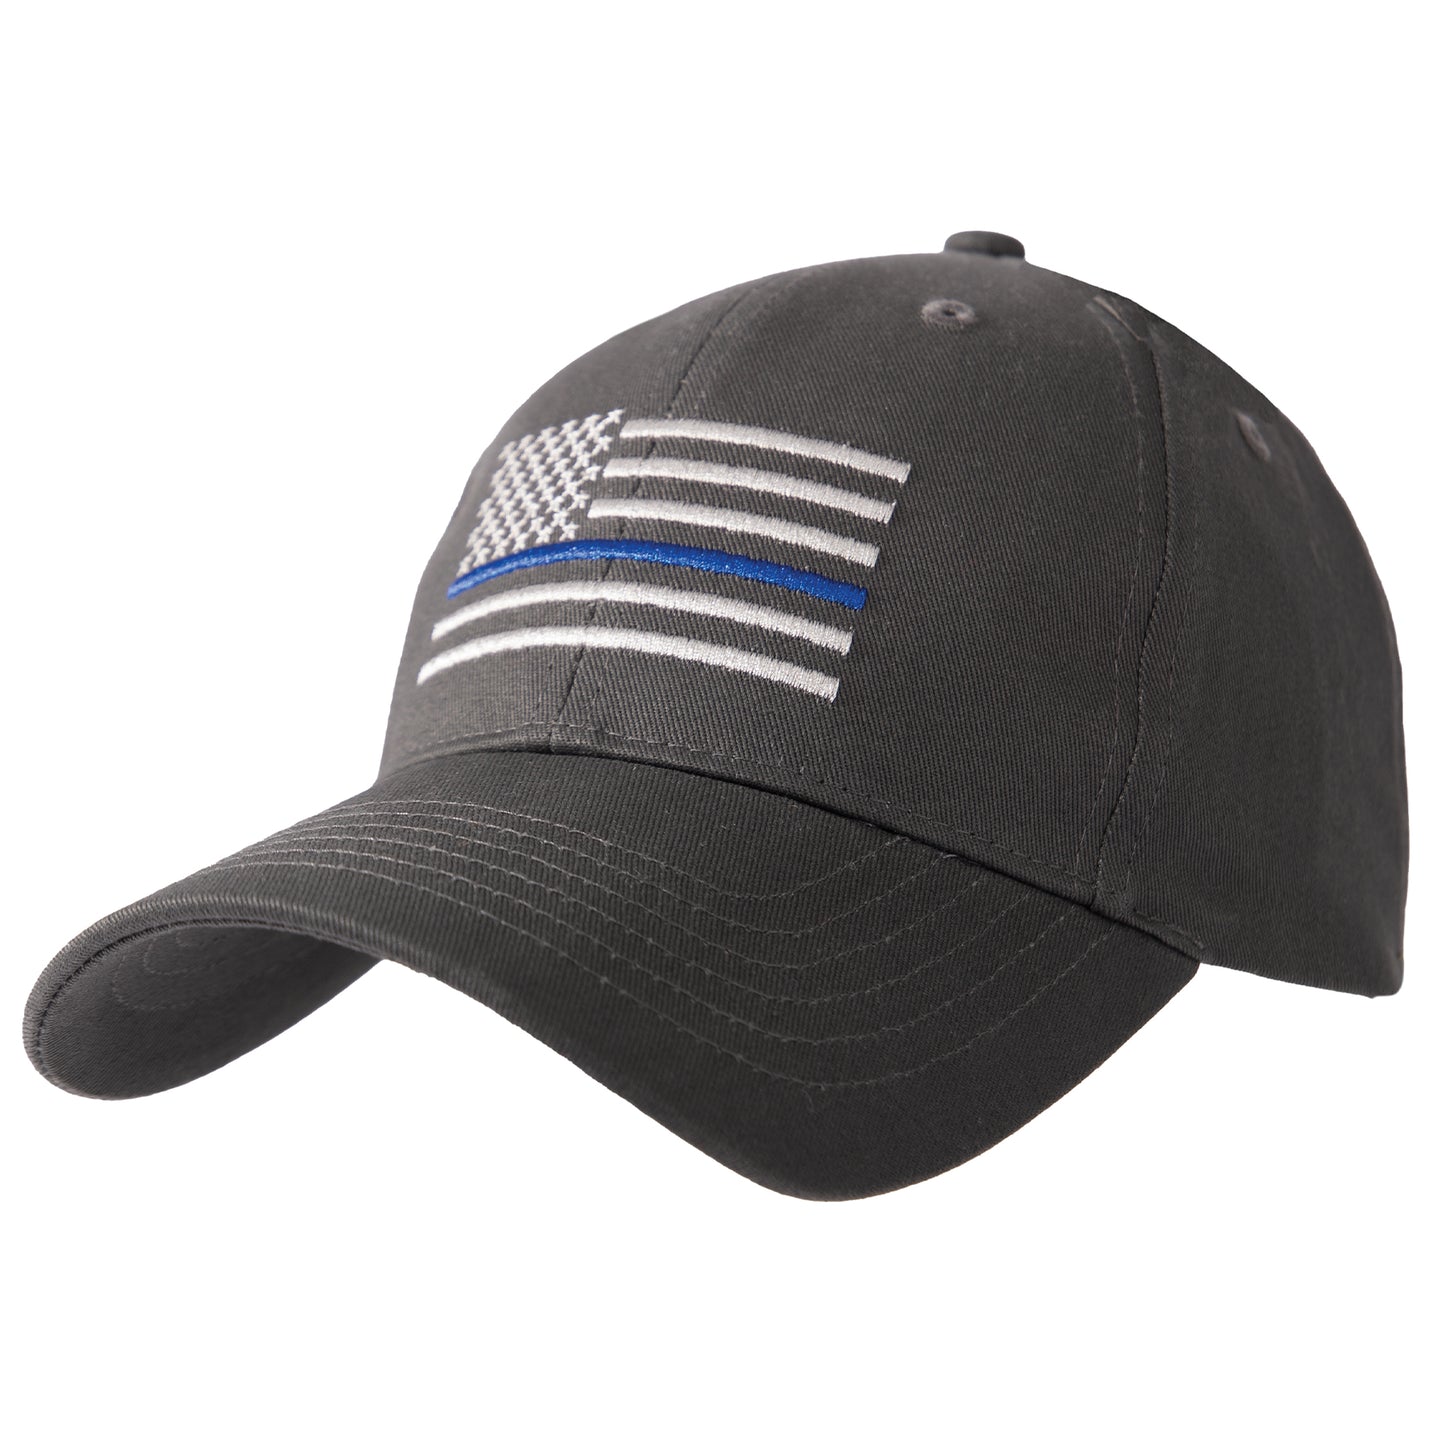 Thin Blue Line Embroidered Cap